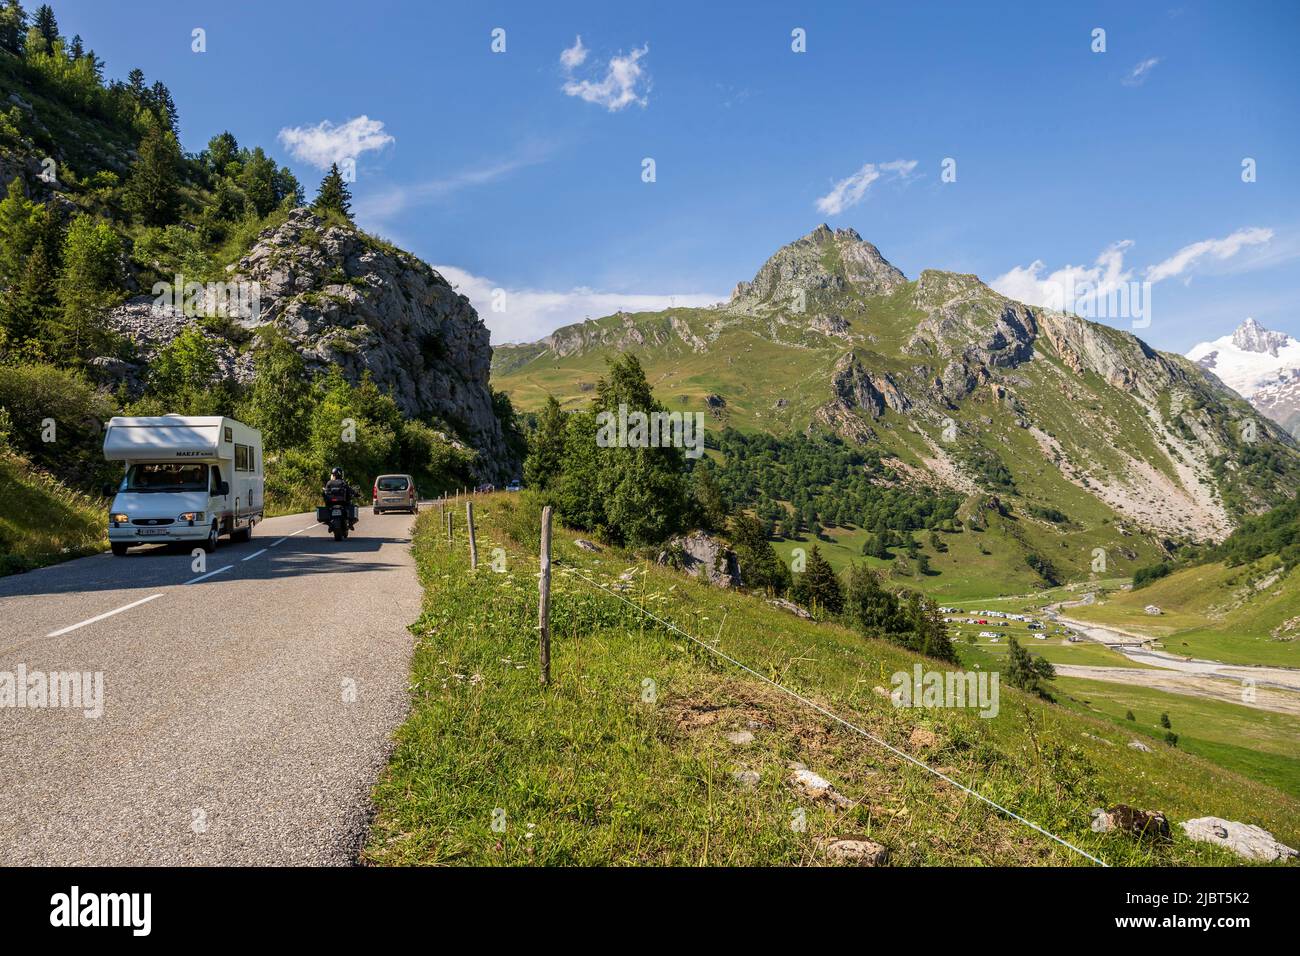 France, Savoie, Bourg-Saint-Maurice, view from the Route des Grandes Alpes of the southern slope of the Cormet de Roselend pass on the Chapieux valley and the Aiguille des Glaciers (3816 m) in the background Stock Photo